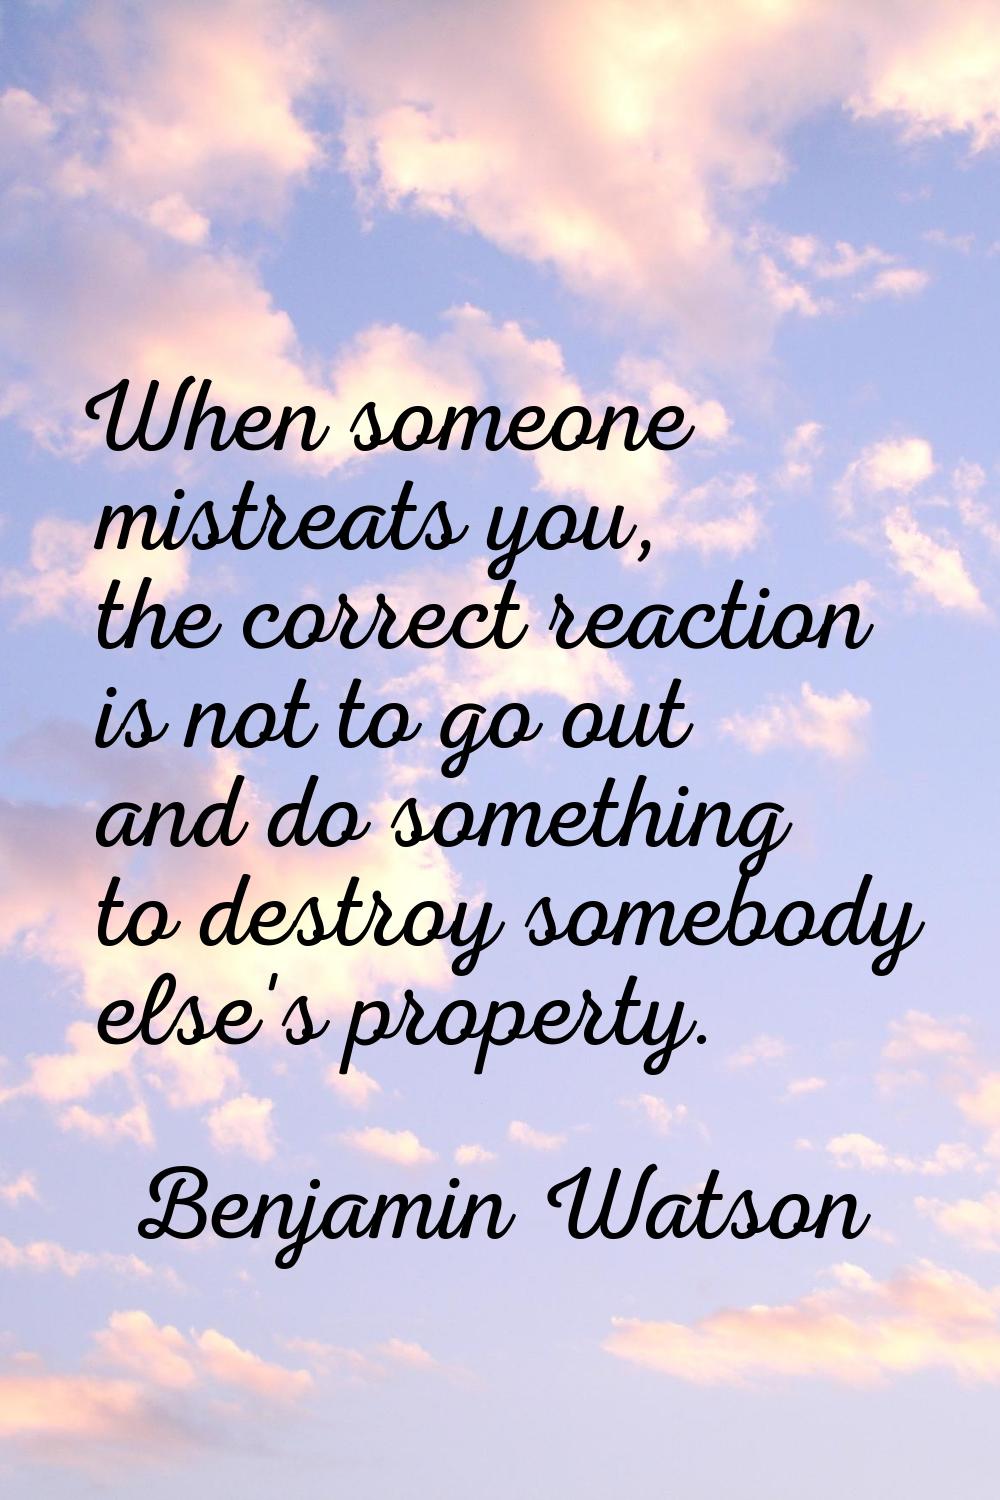 When someone mistreats you, the correct reaction is not to go out and do something to destroy someb